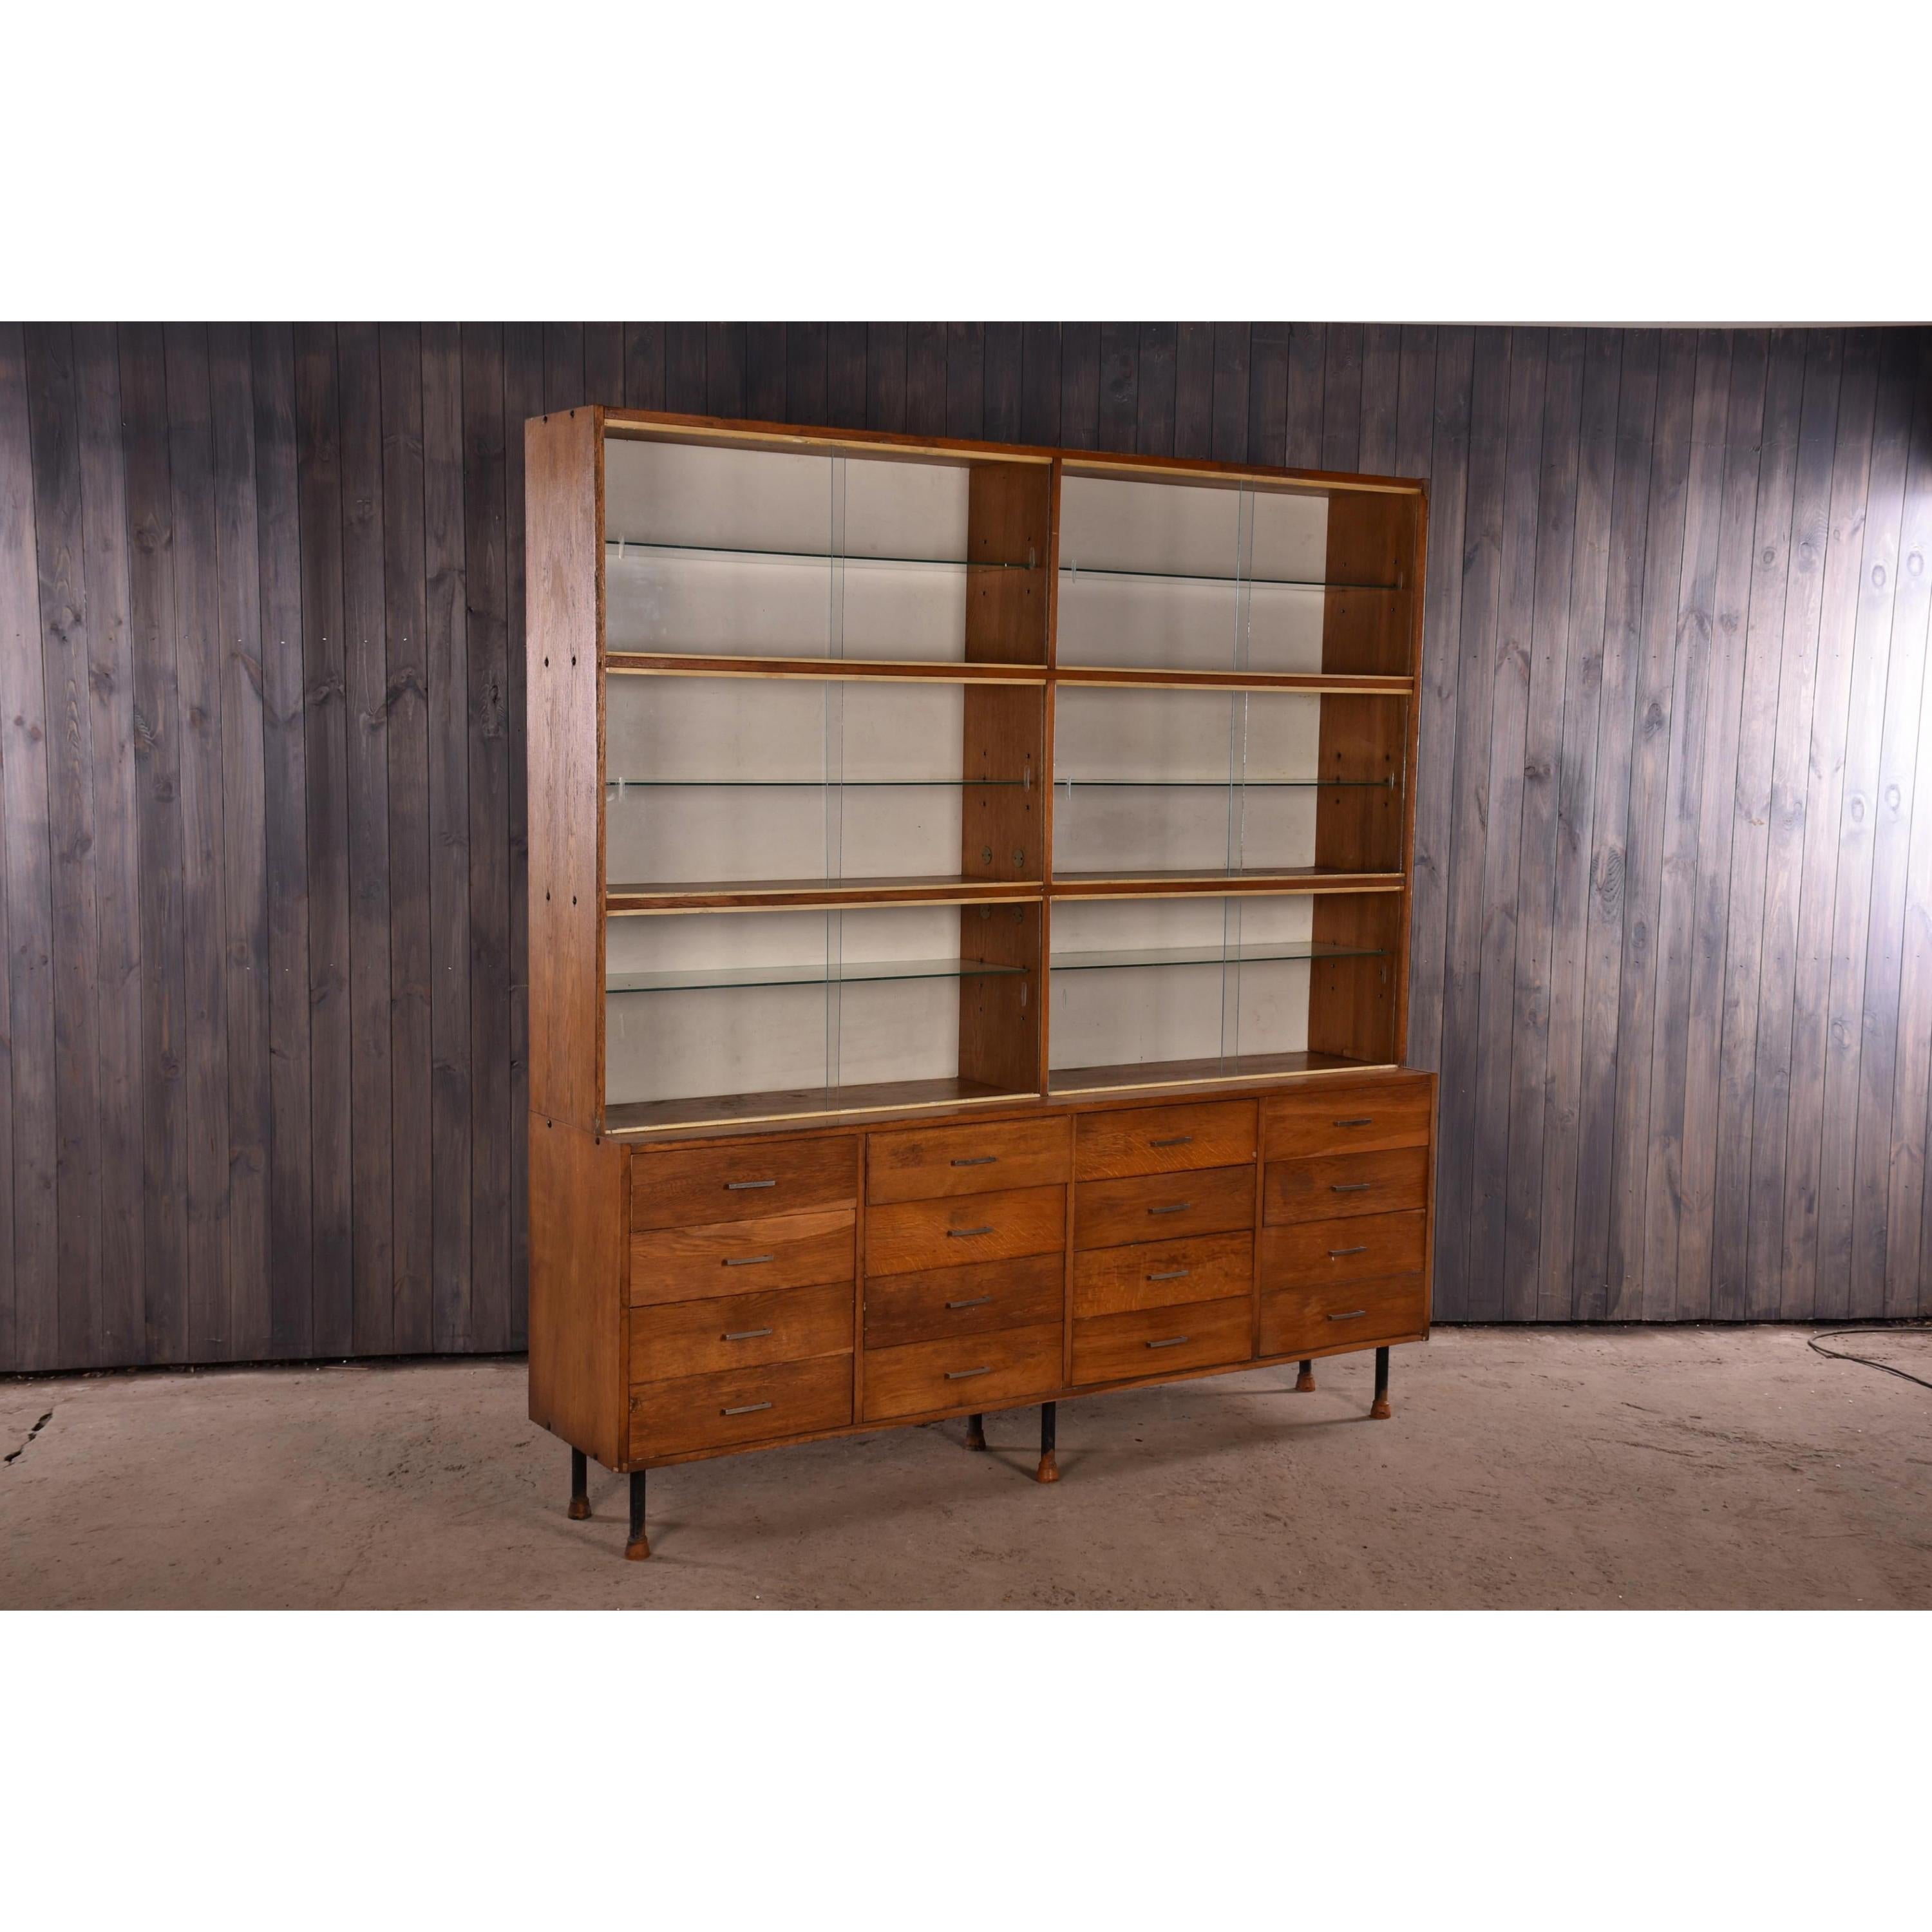 Apothecary Haberdashery display cabinet circa 1930s Number 11

Apothecary / Pharmacy / Chemist / Shop Display / Restaurant cabinet, circa 1930s

Apothecary Pharmacy beech display cabinet dating to circa 1930s, This piece is one of seven similar